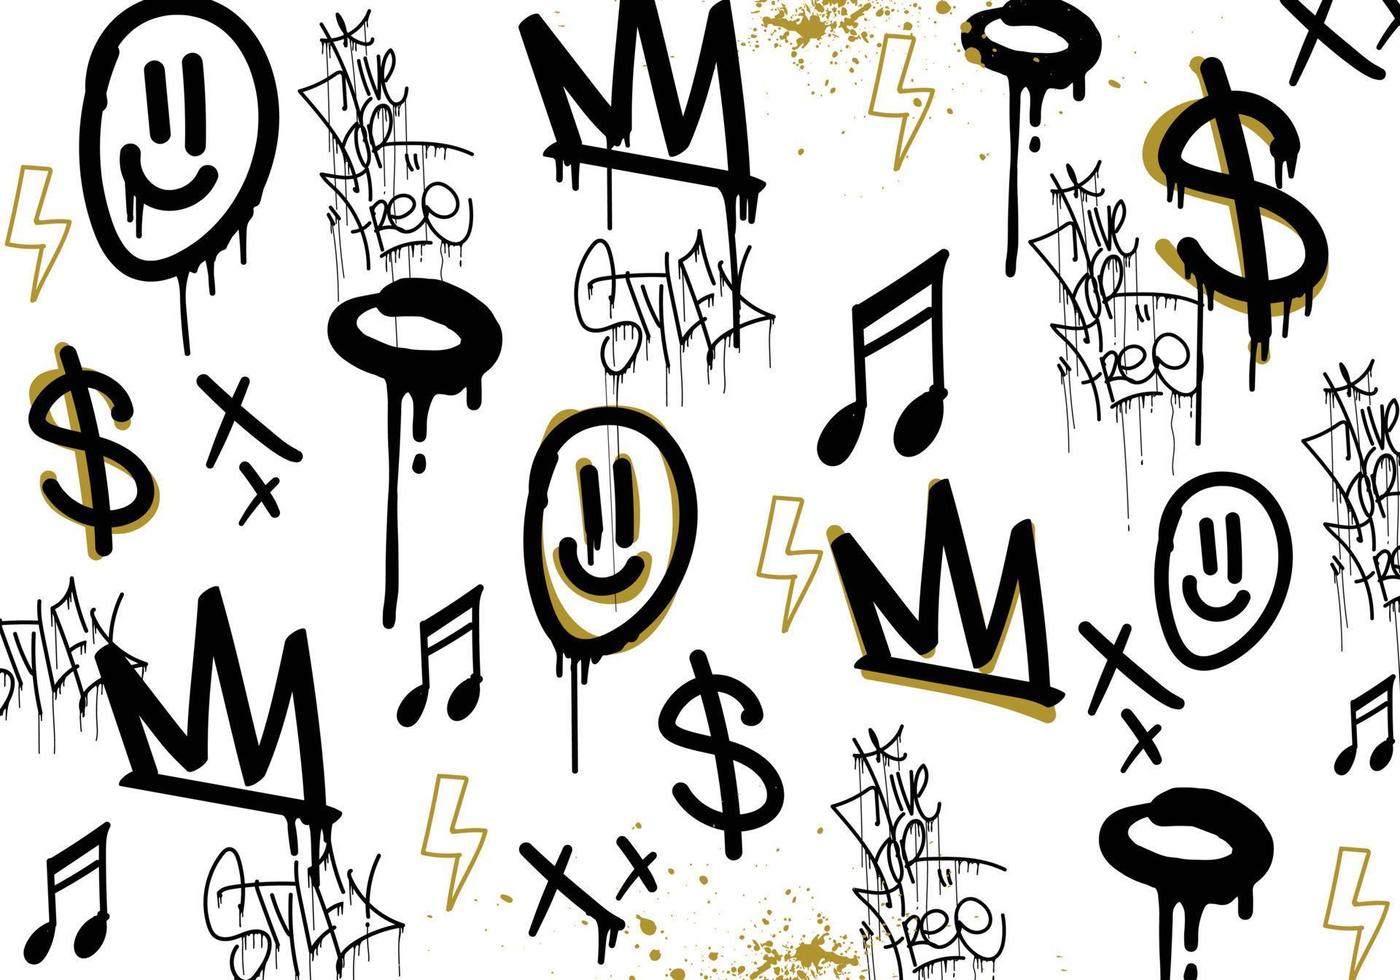 Seamless graffiti art illustration pattern. Graffiti background with throw-up and tagging hand-drawn style. Street art graffiti urban theme for prints, banners, and textiles in vector format.